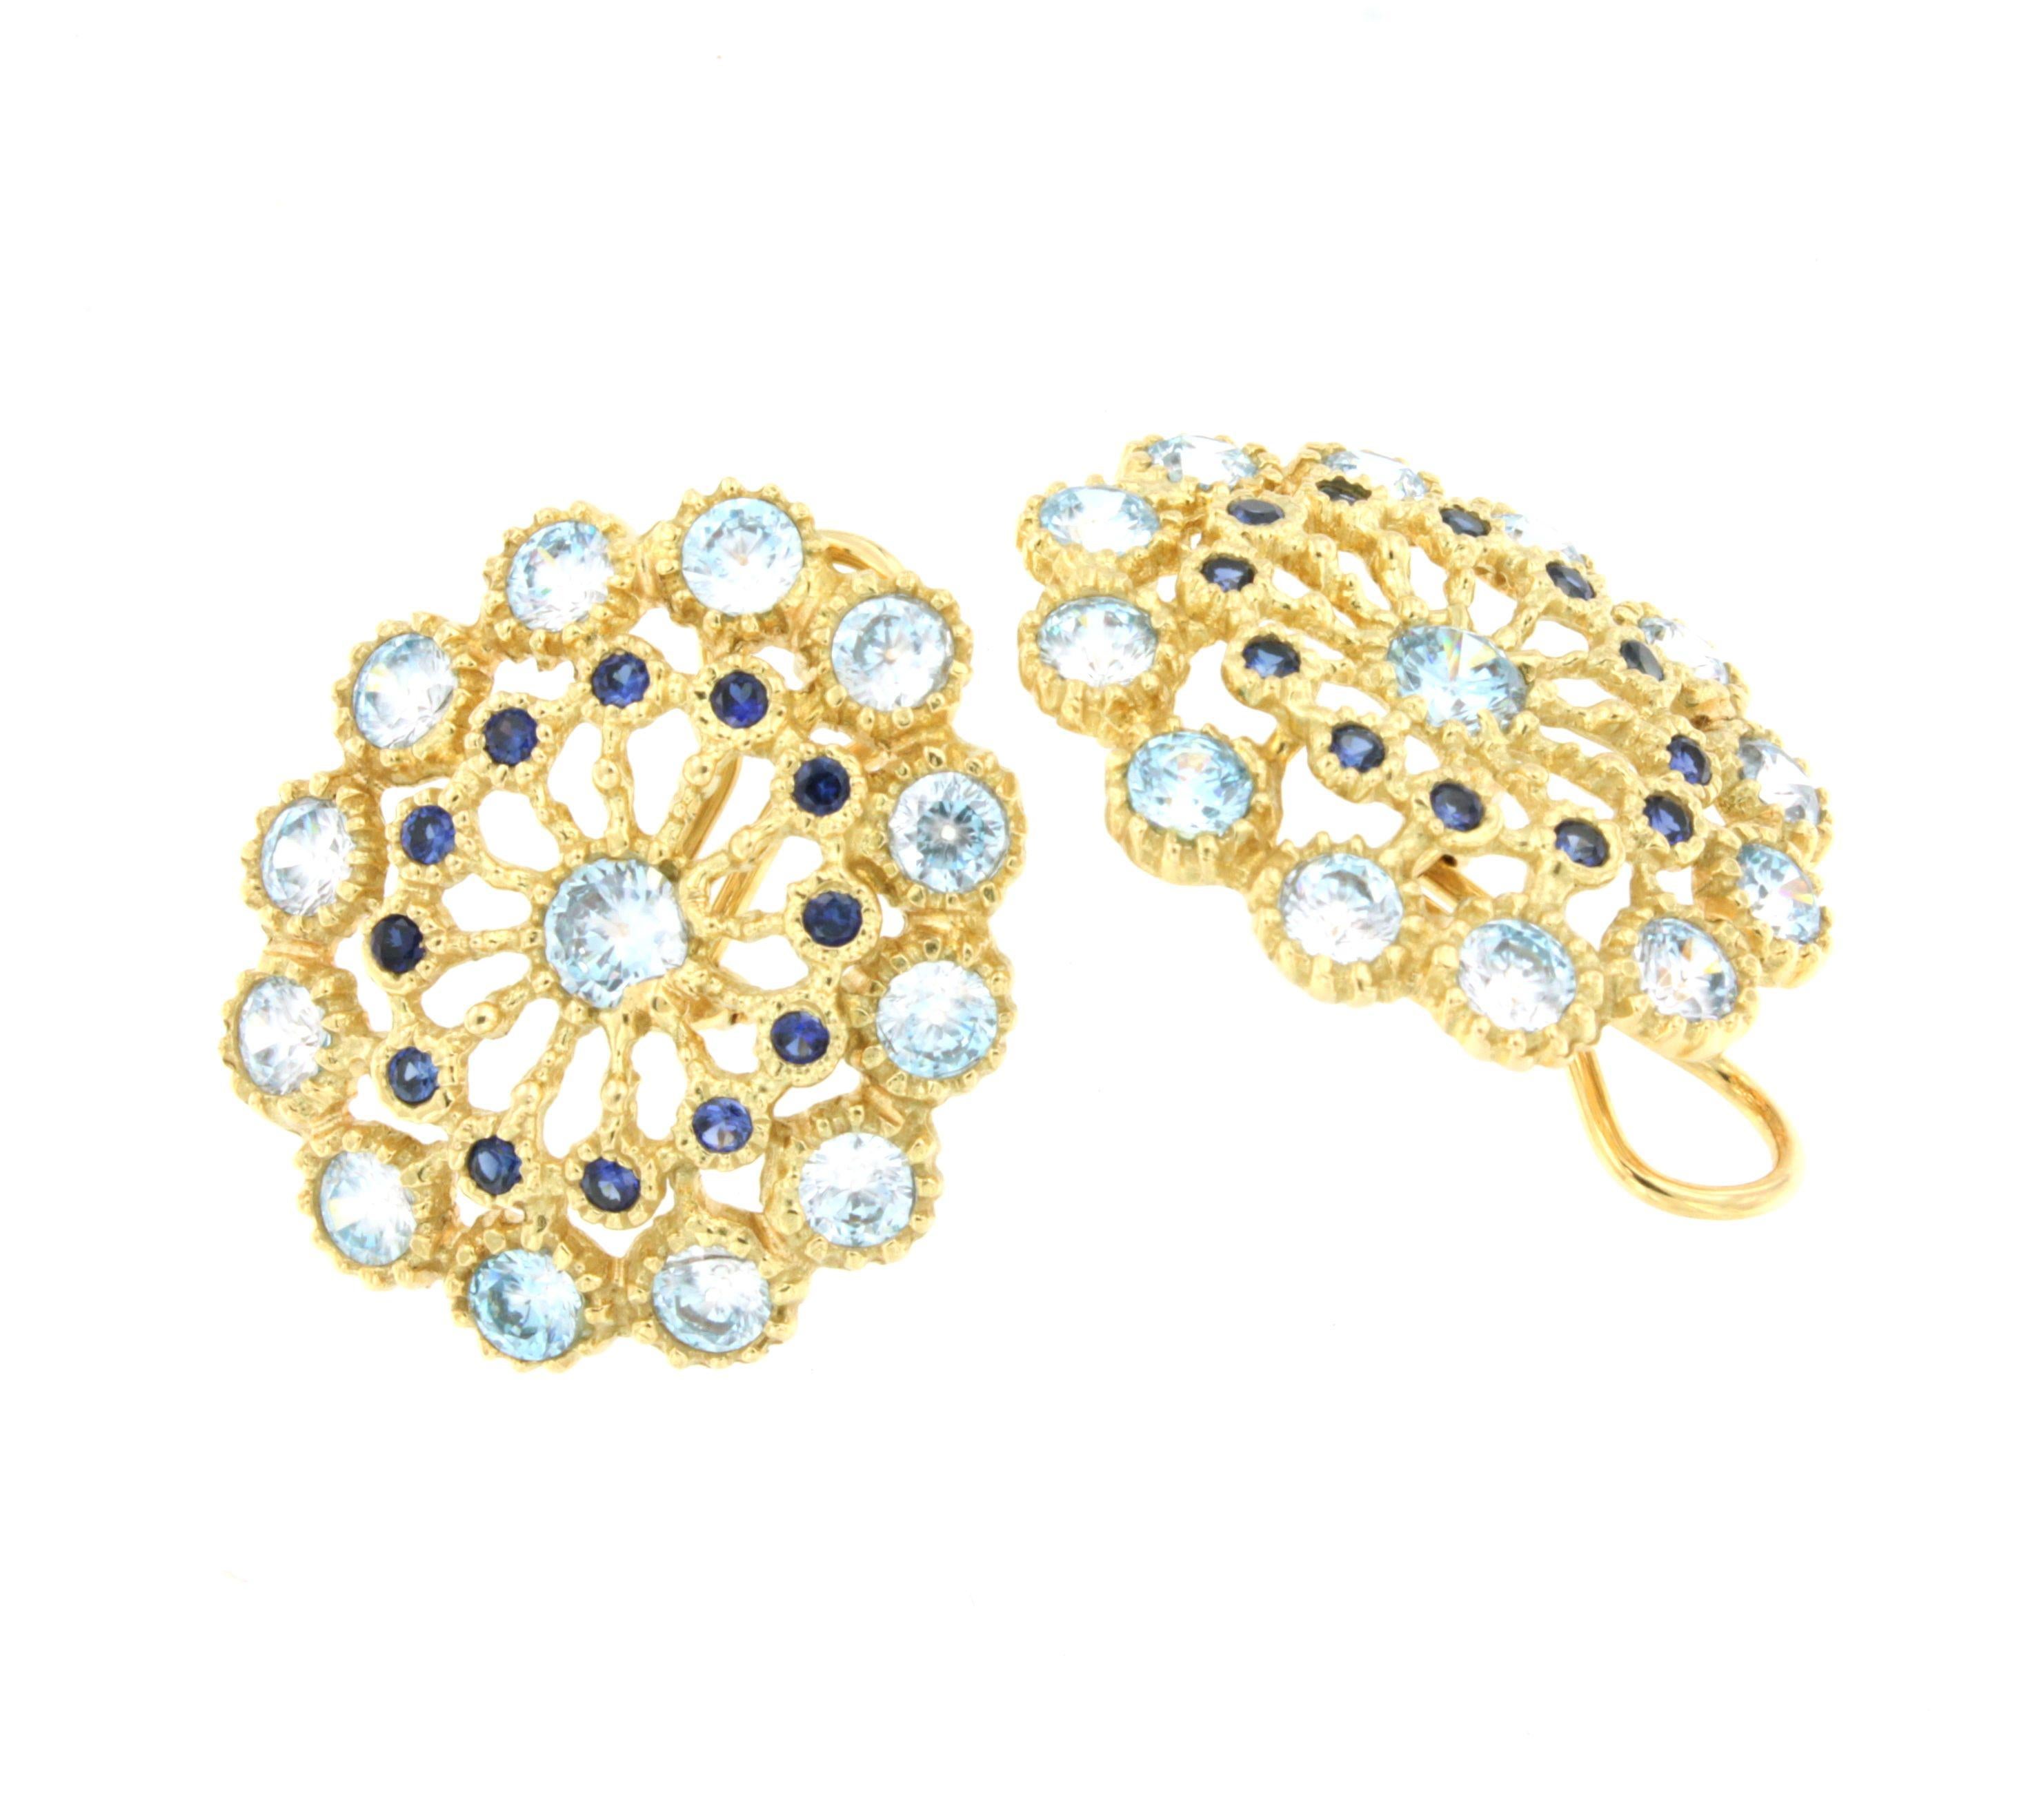 Round Cut 18Kt Yellow Gold with Blue Topaz and Blue Sapphires Fashion Clips Earrings For Sale